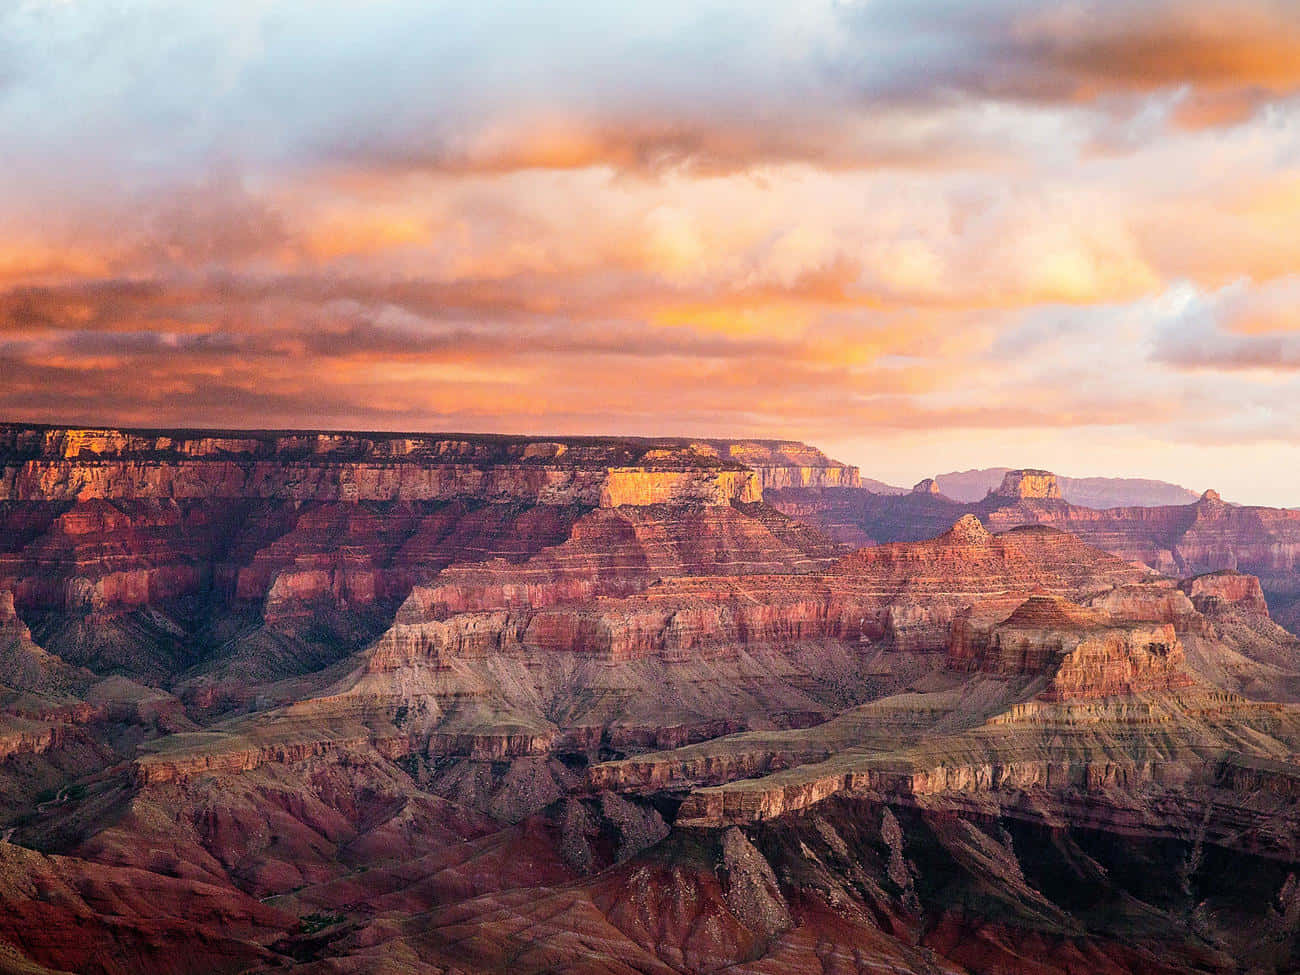 "The breathtaking view of the Grand Canyon"